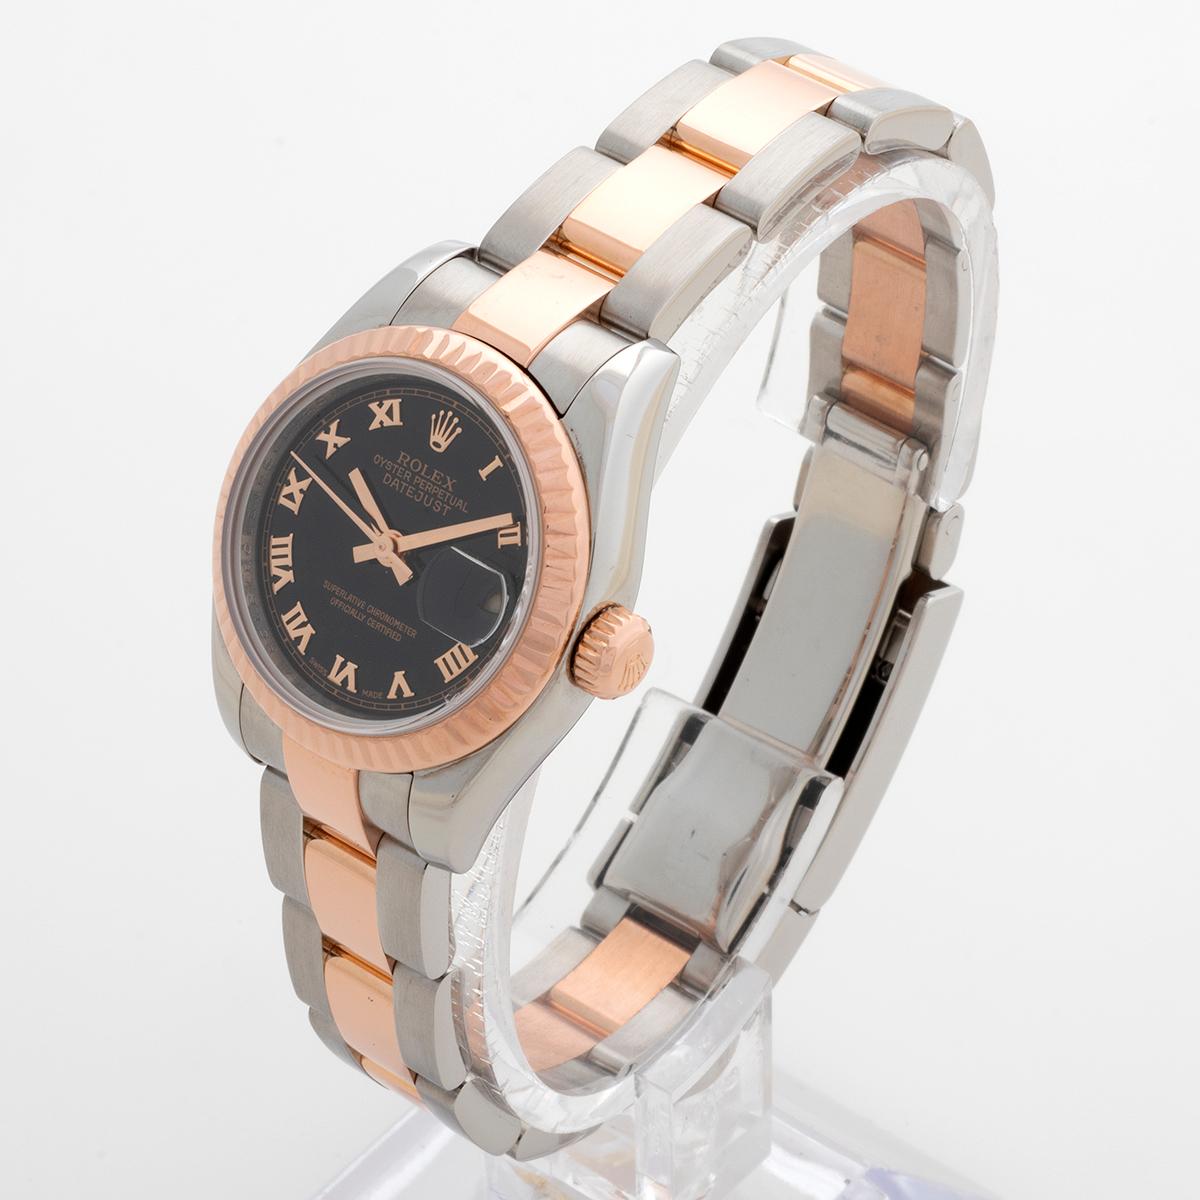 Our unusual and very attractive Rolex Lady Datejust reference 179171 features a 18k rose gold (everose) and stainless steel case with fluted bezel and Oyster bracelet and black Roman Numeral dial. Presented in outstanding condition, we date this